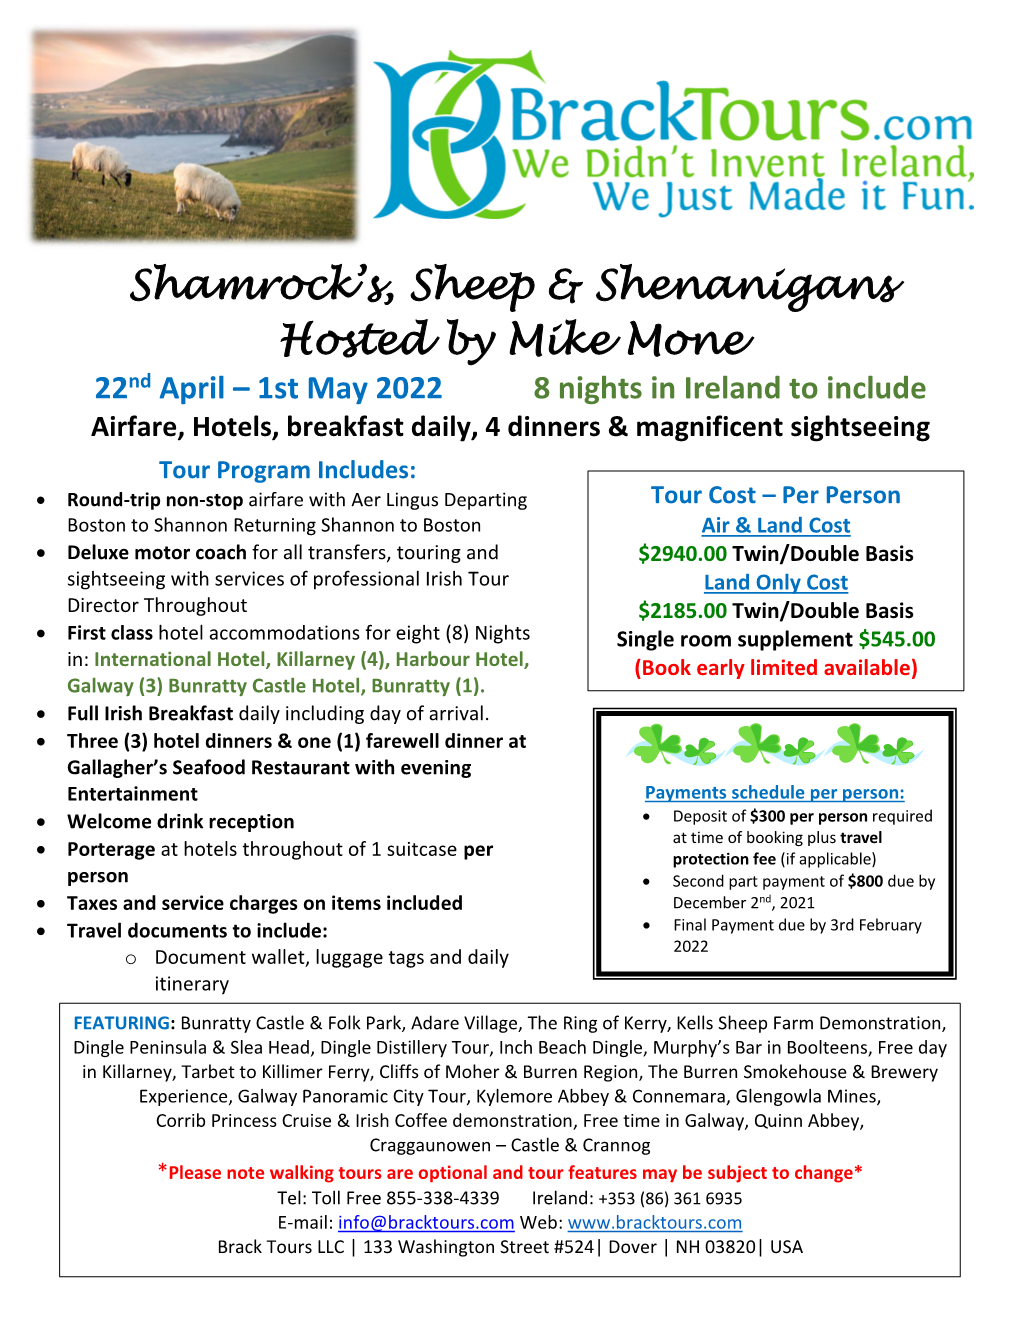 Shamrock's, Sheep & Shenanigans Hosted by Mike Mone